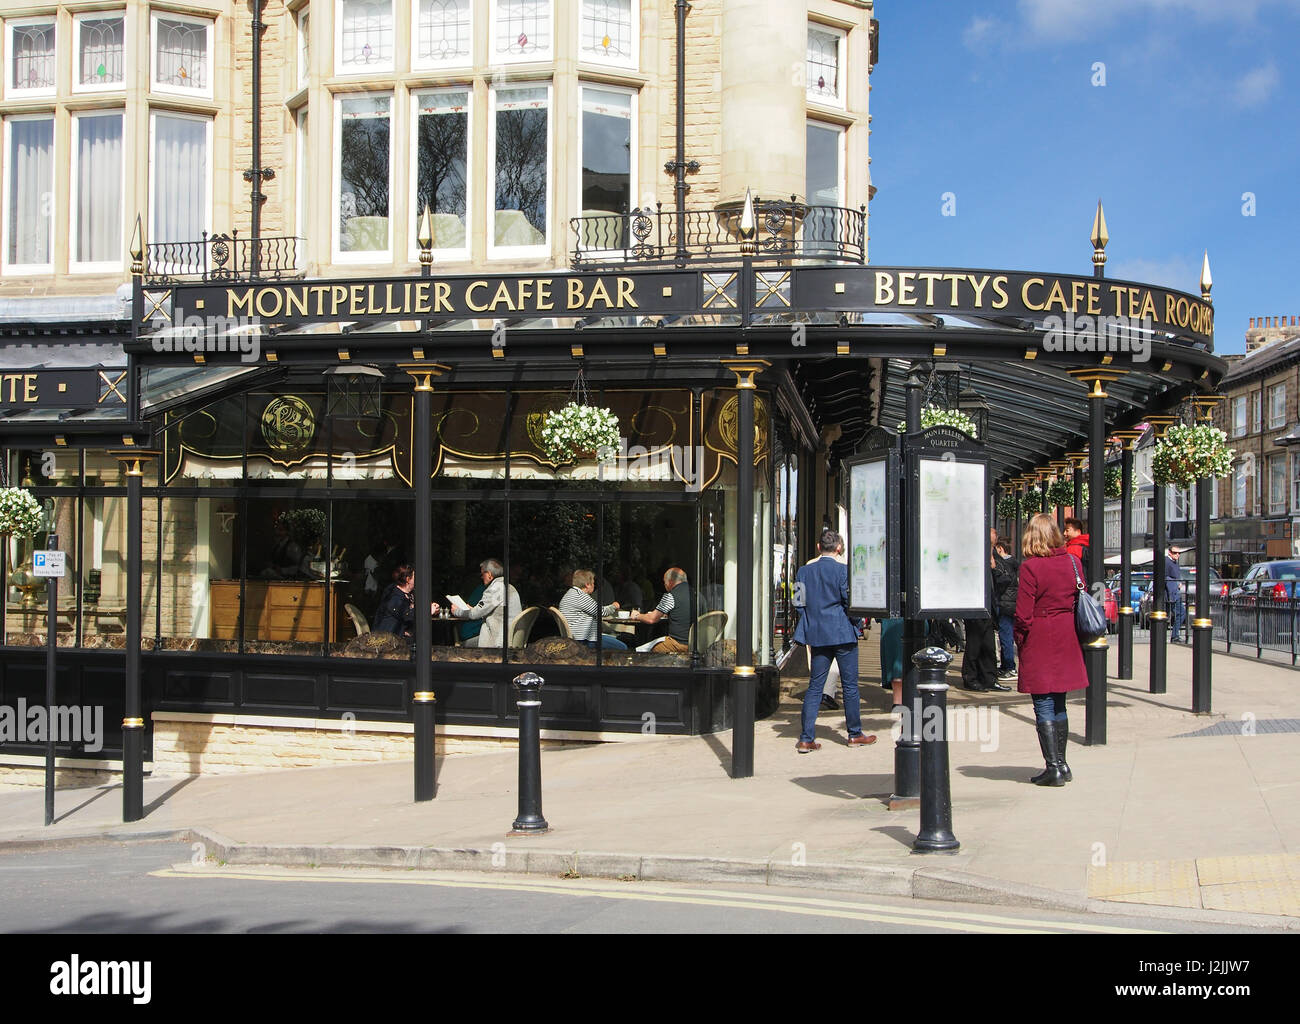 The Montpellier Cafe Bar, otherwise known as Betty's Tea Rooms.  Montpellier district of Harrogate, North Yorkshire, England, UK, on a summer day. Stock Photo